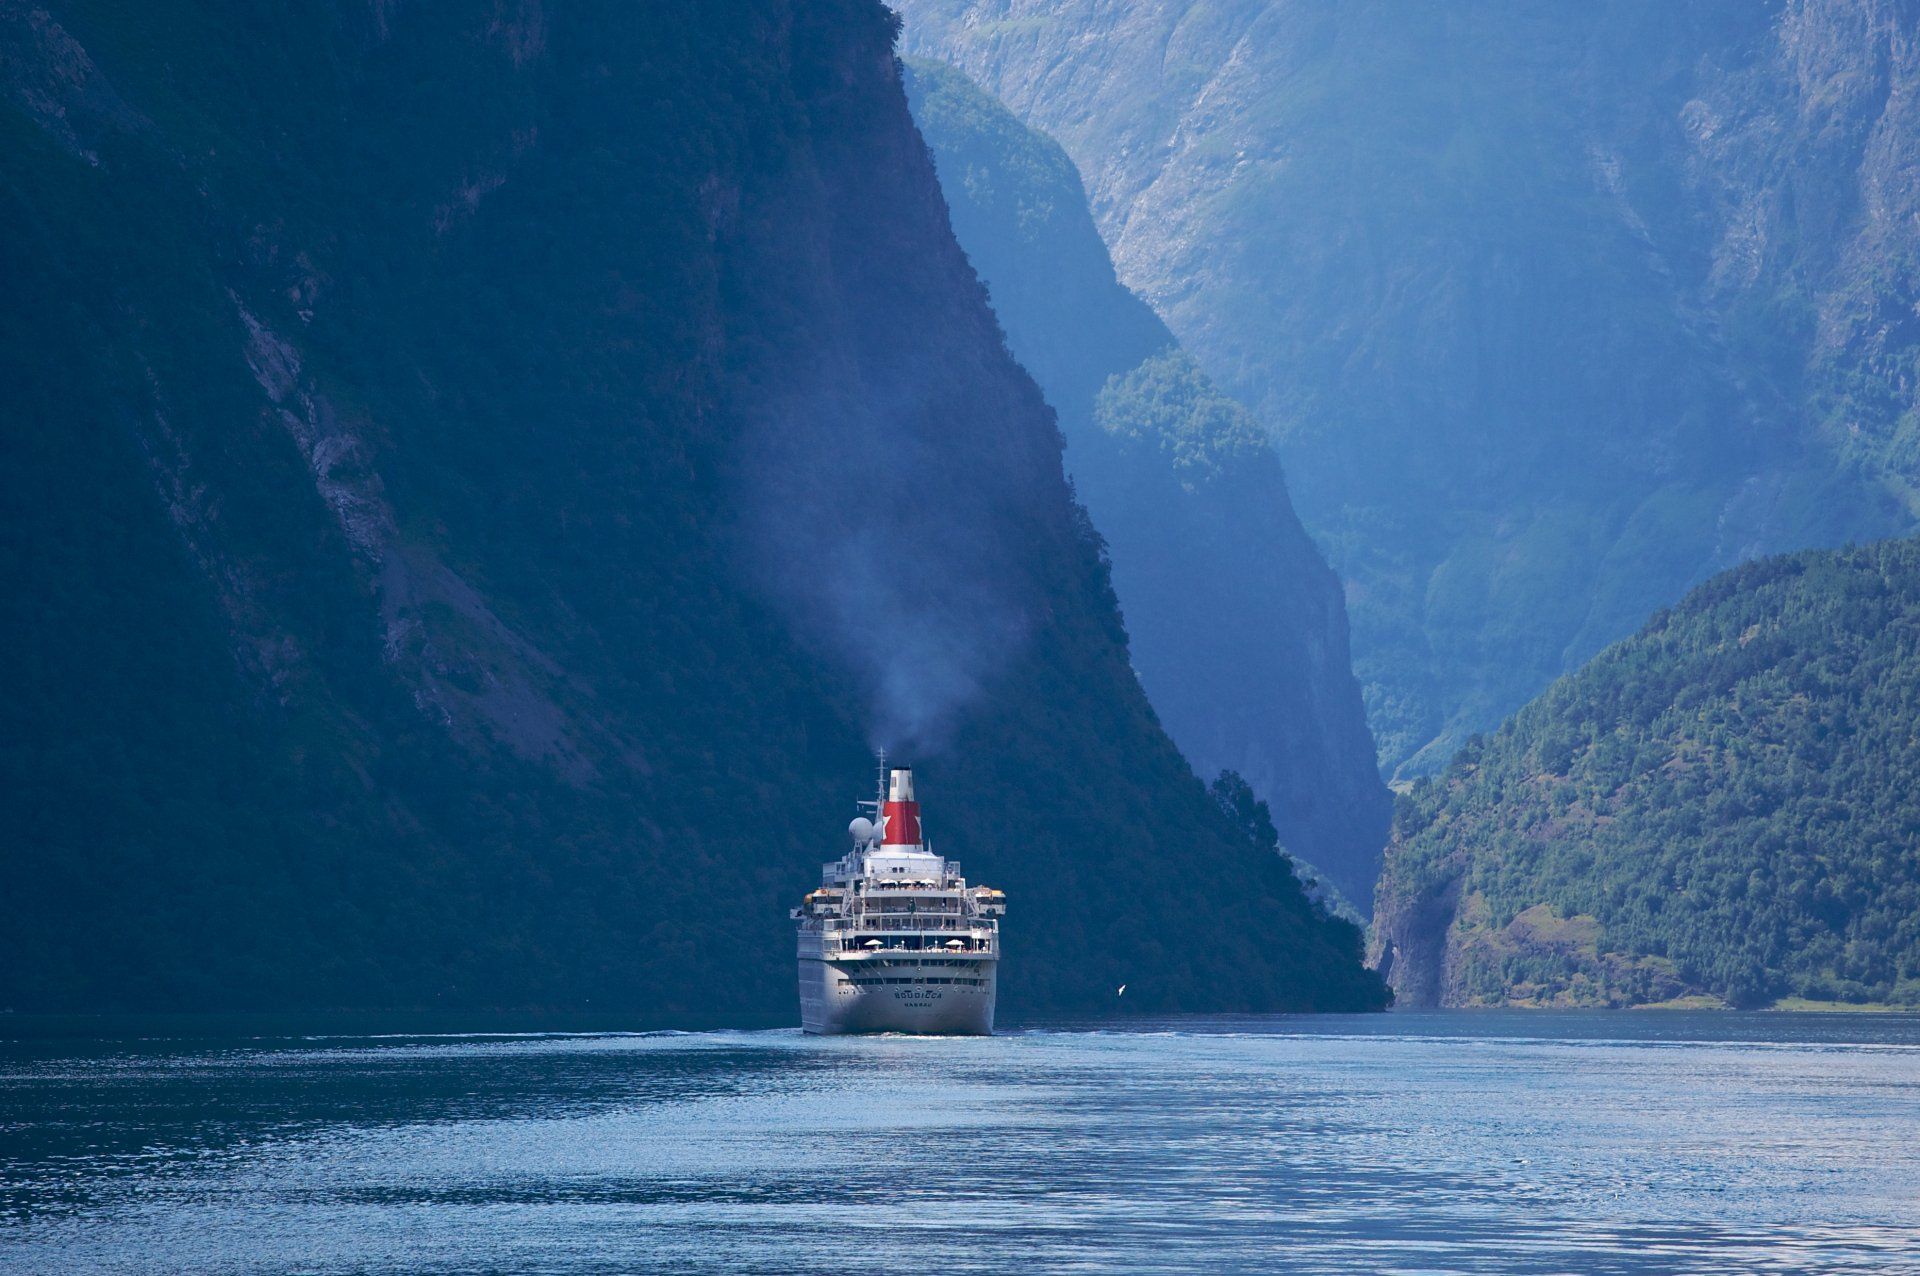 Cruise Liner In Sognefjord - Chattanooga, TN - Expedia Cruises